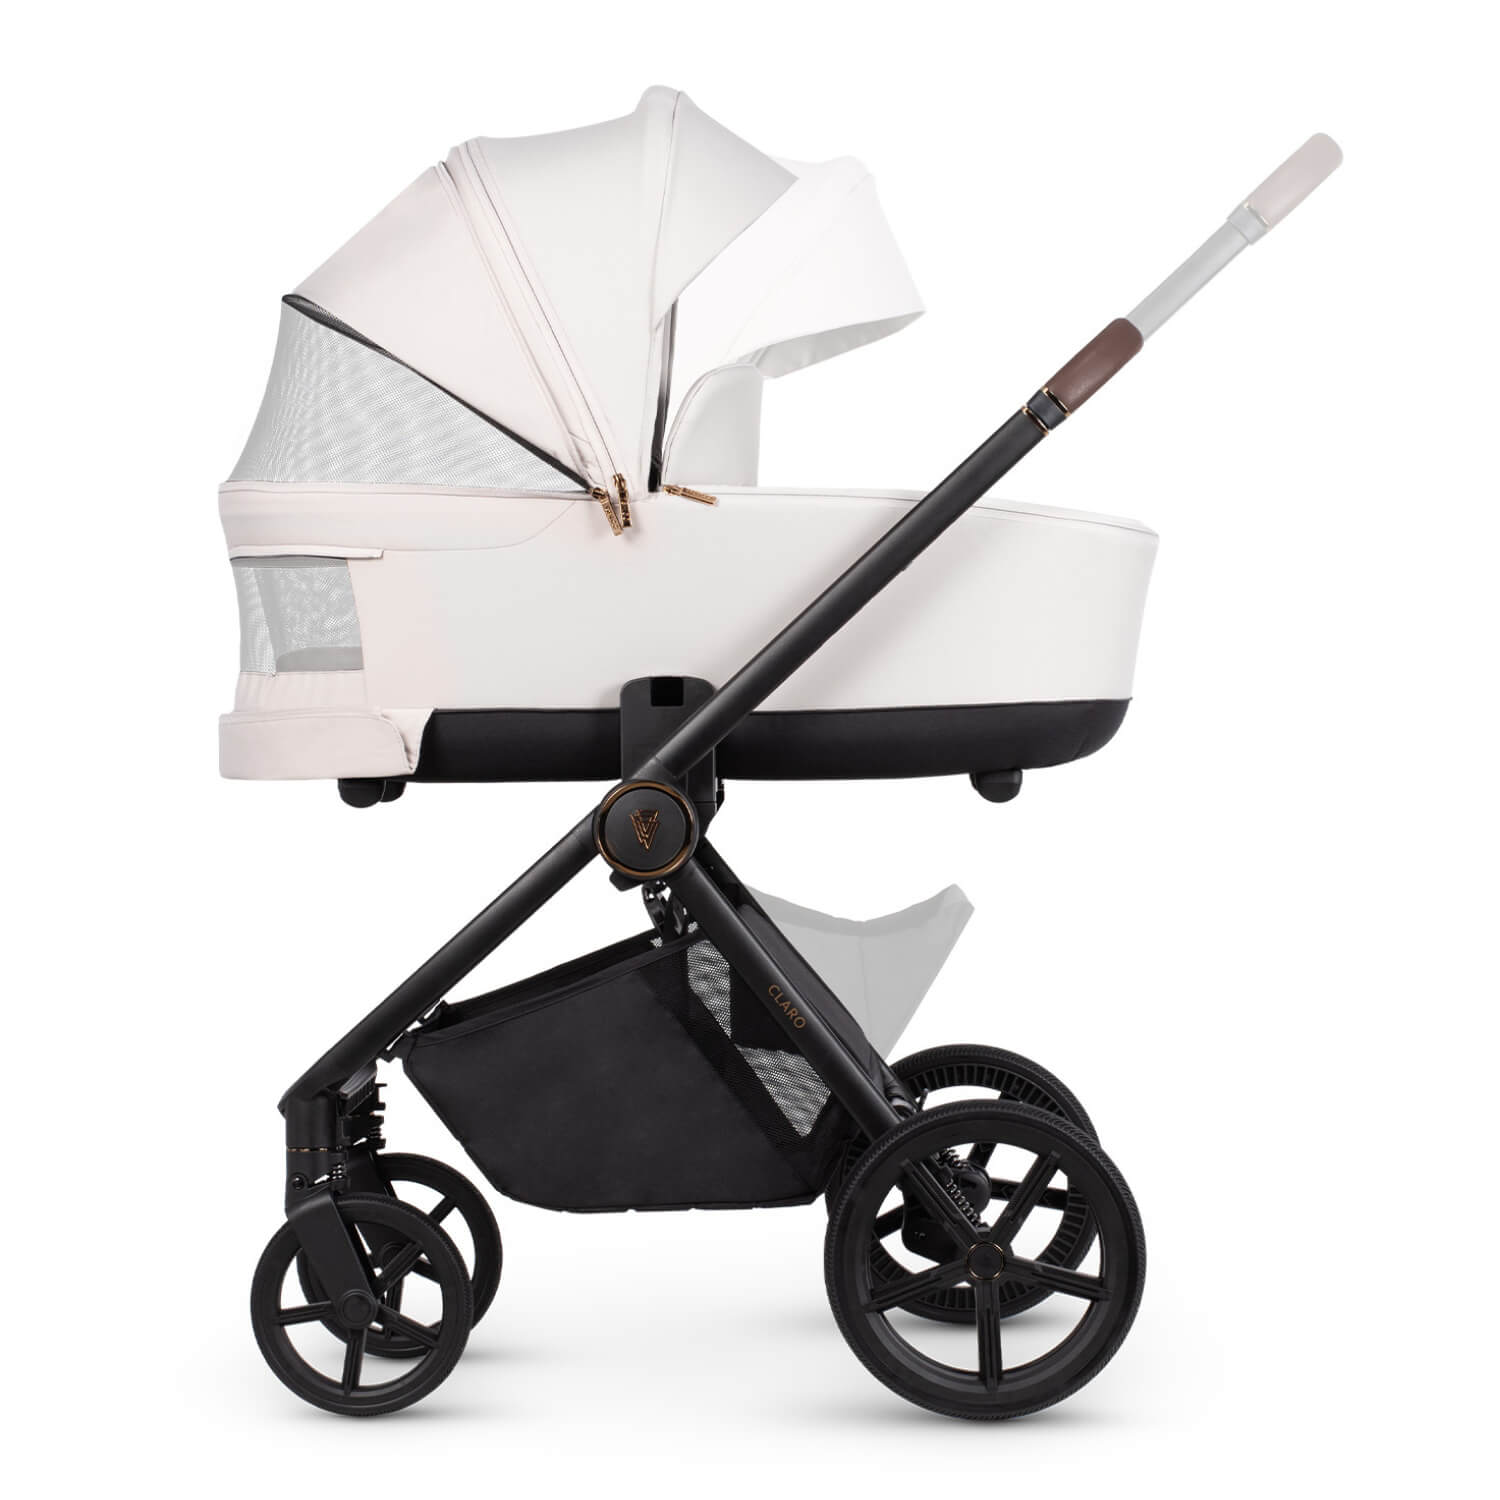 Venicci Claro carrycot in Vanilla with the panoramic ventilation opened